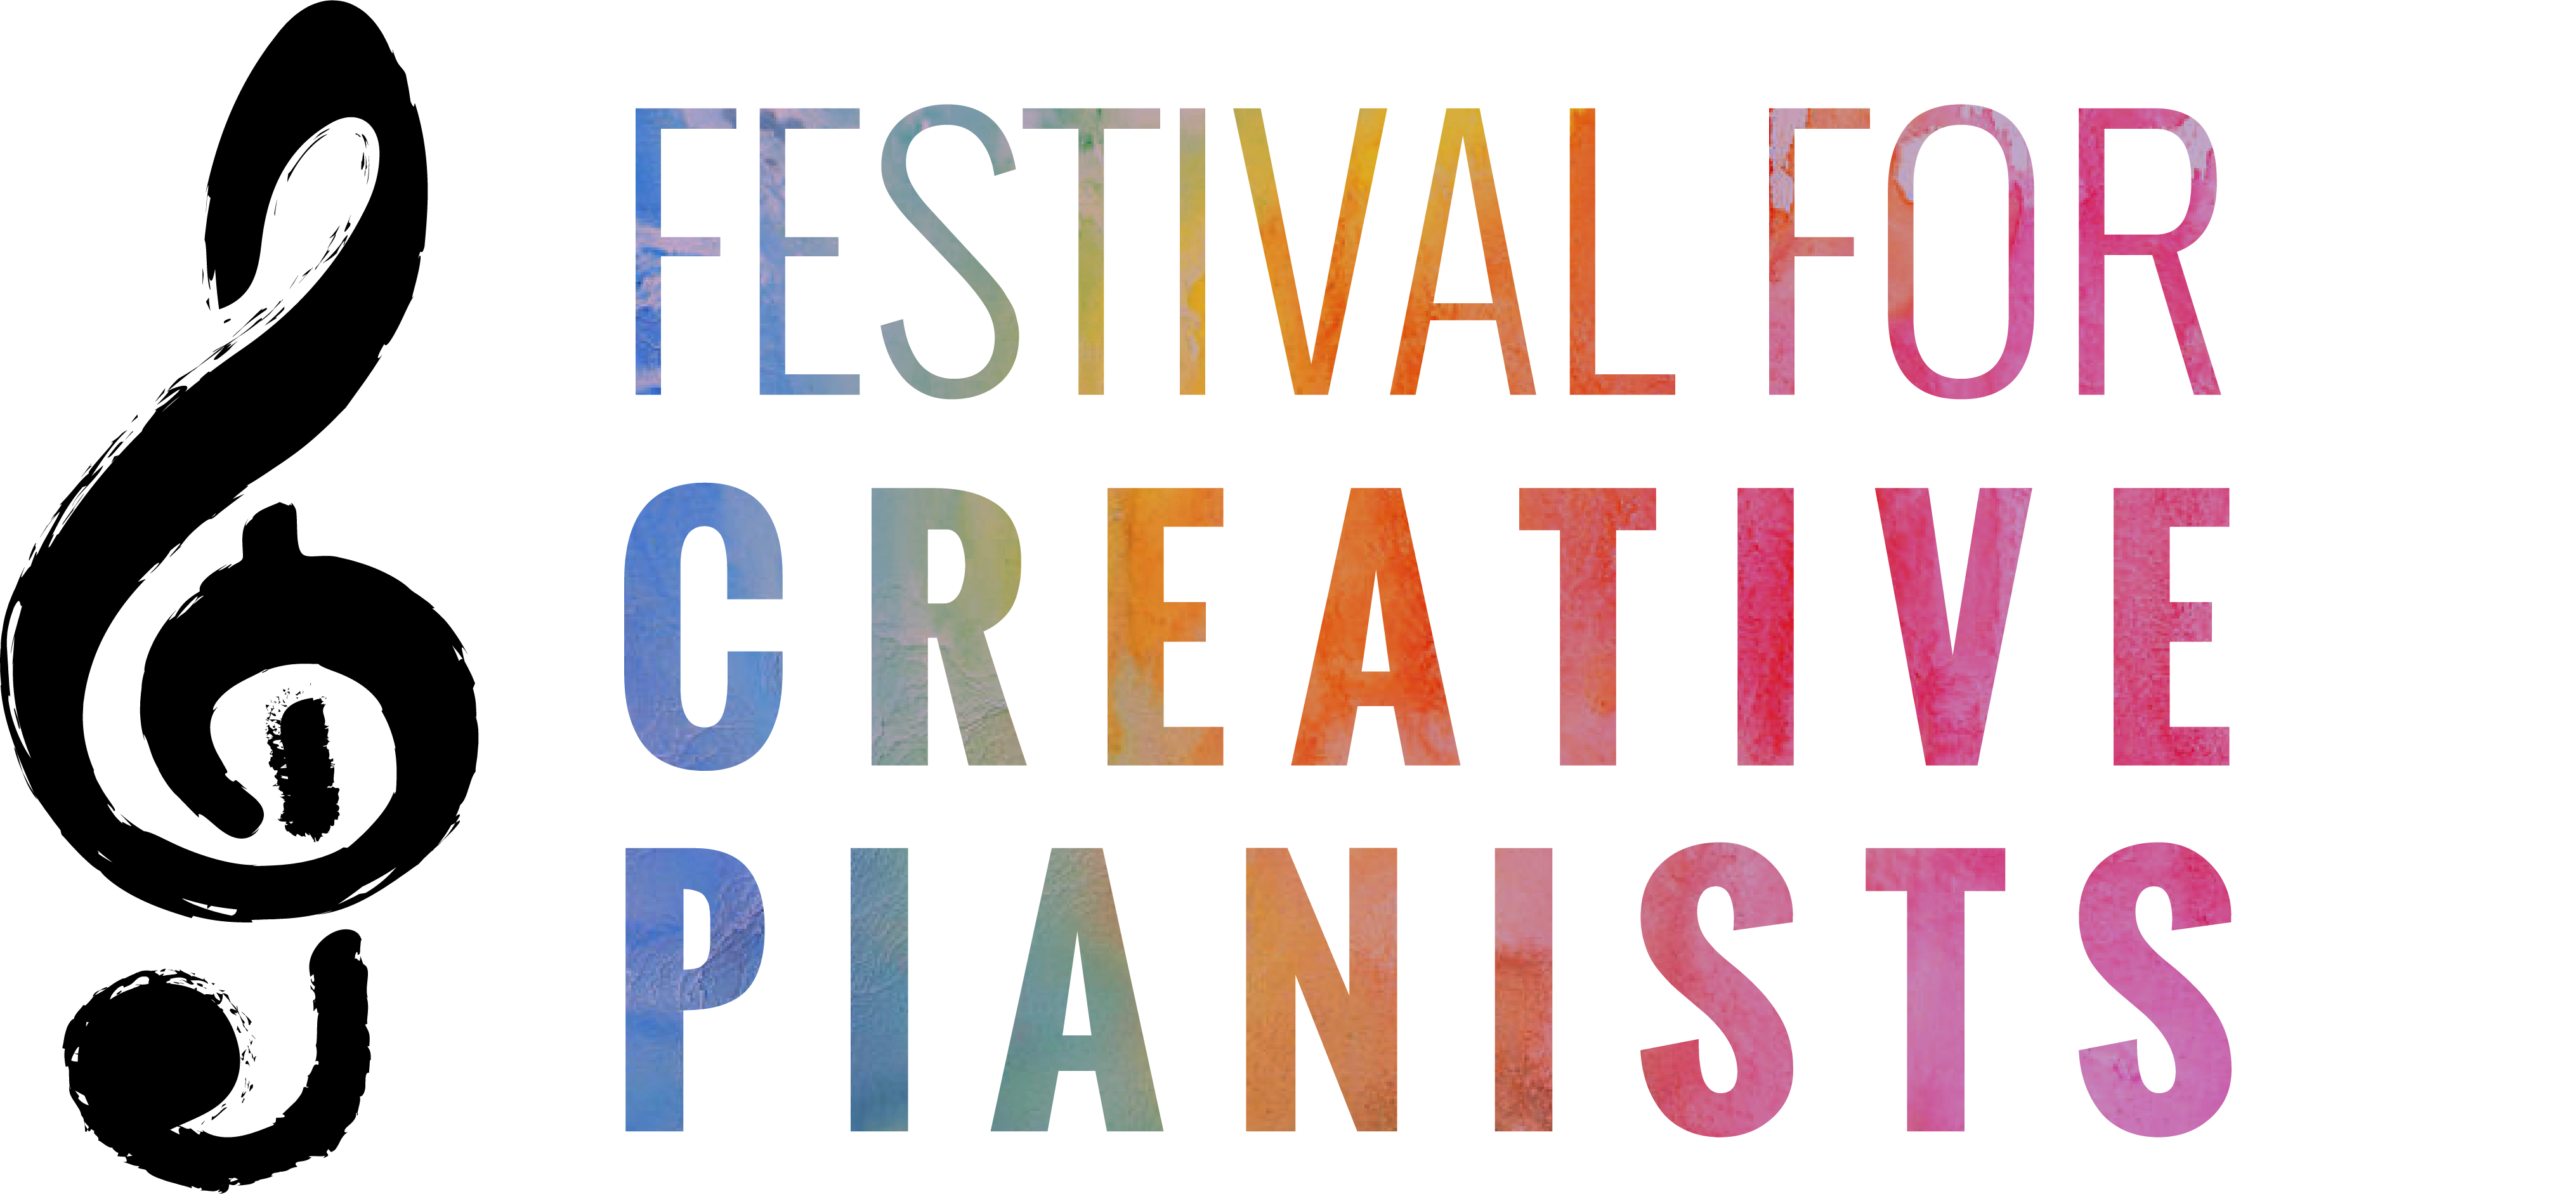 Festival for Creative Pianists logo